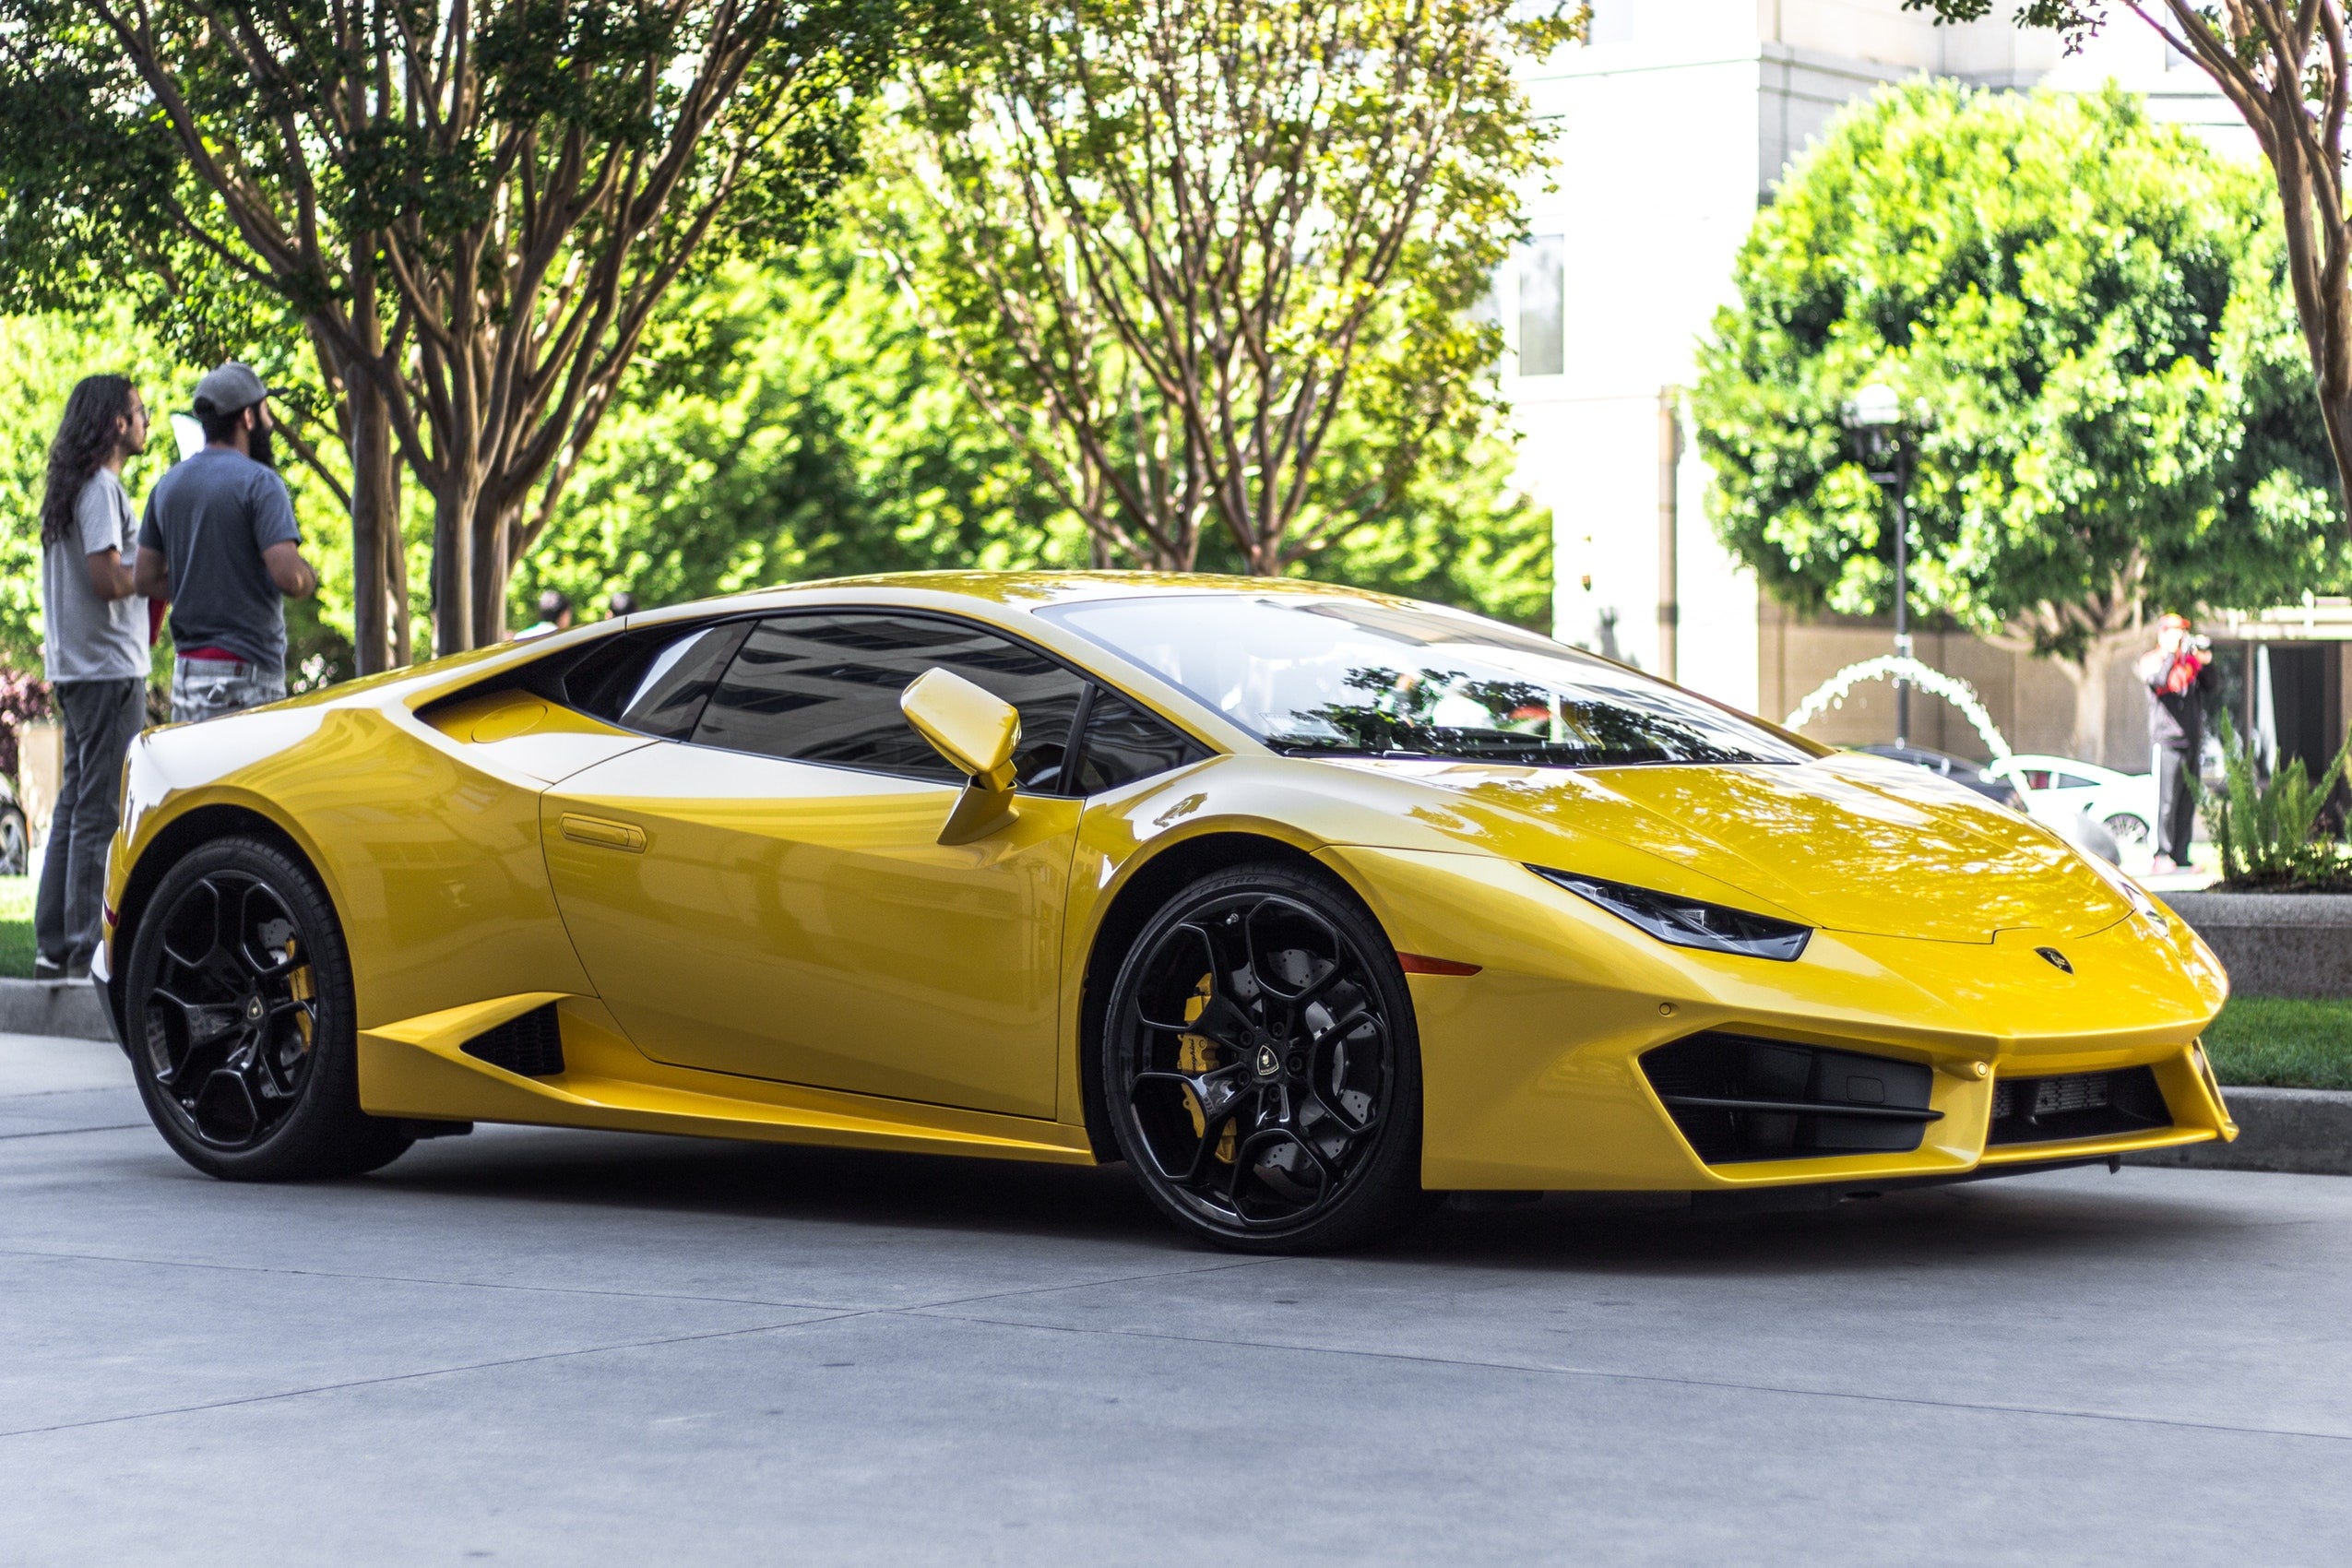 How Much Does It Cost To Own A Lamborghini Huracan